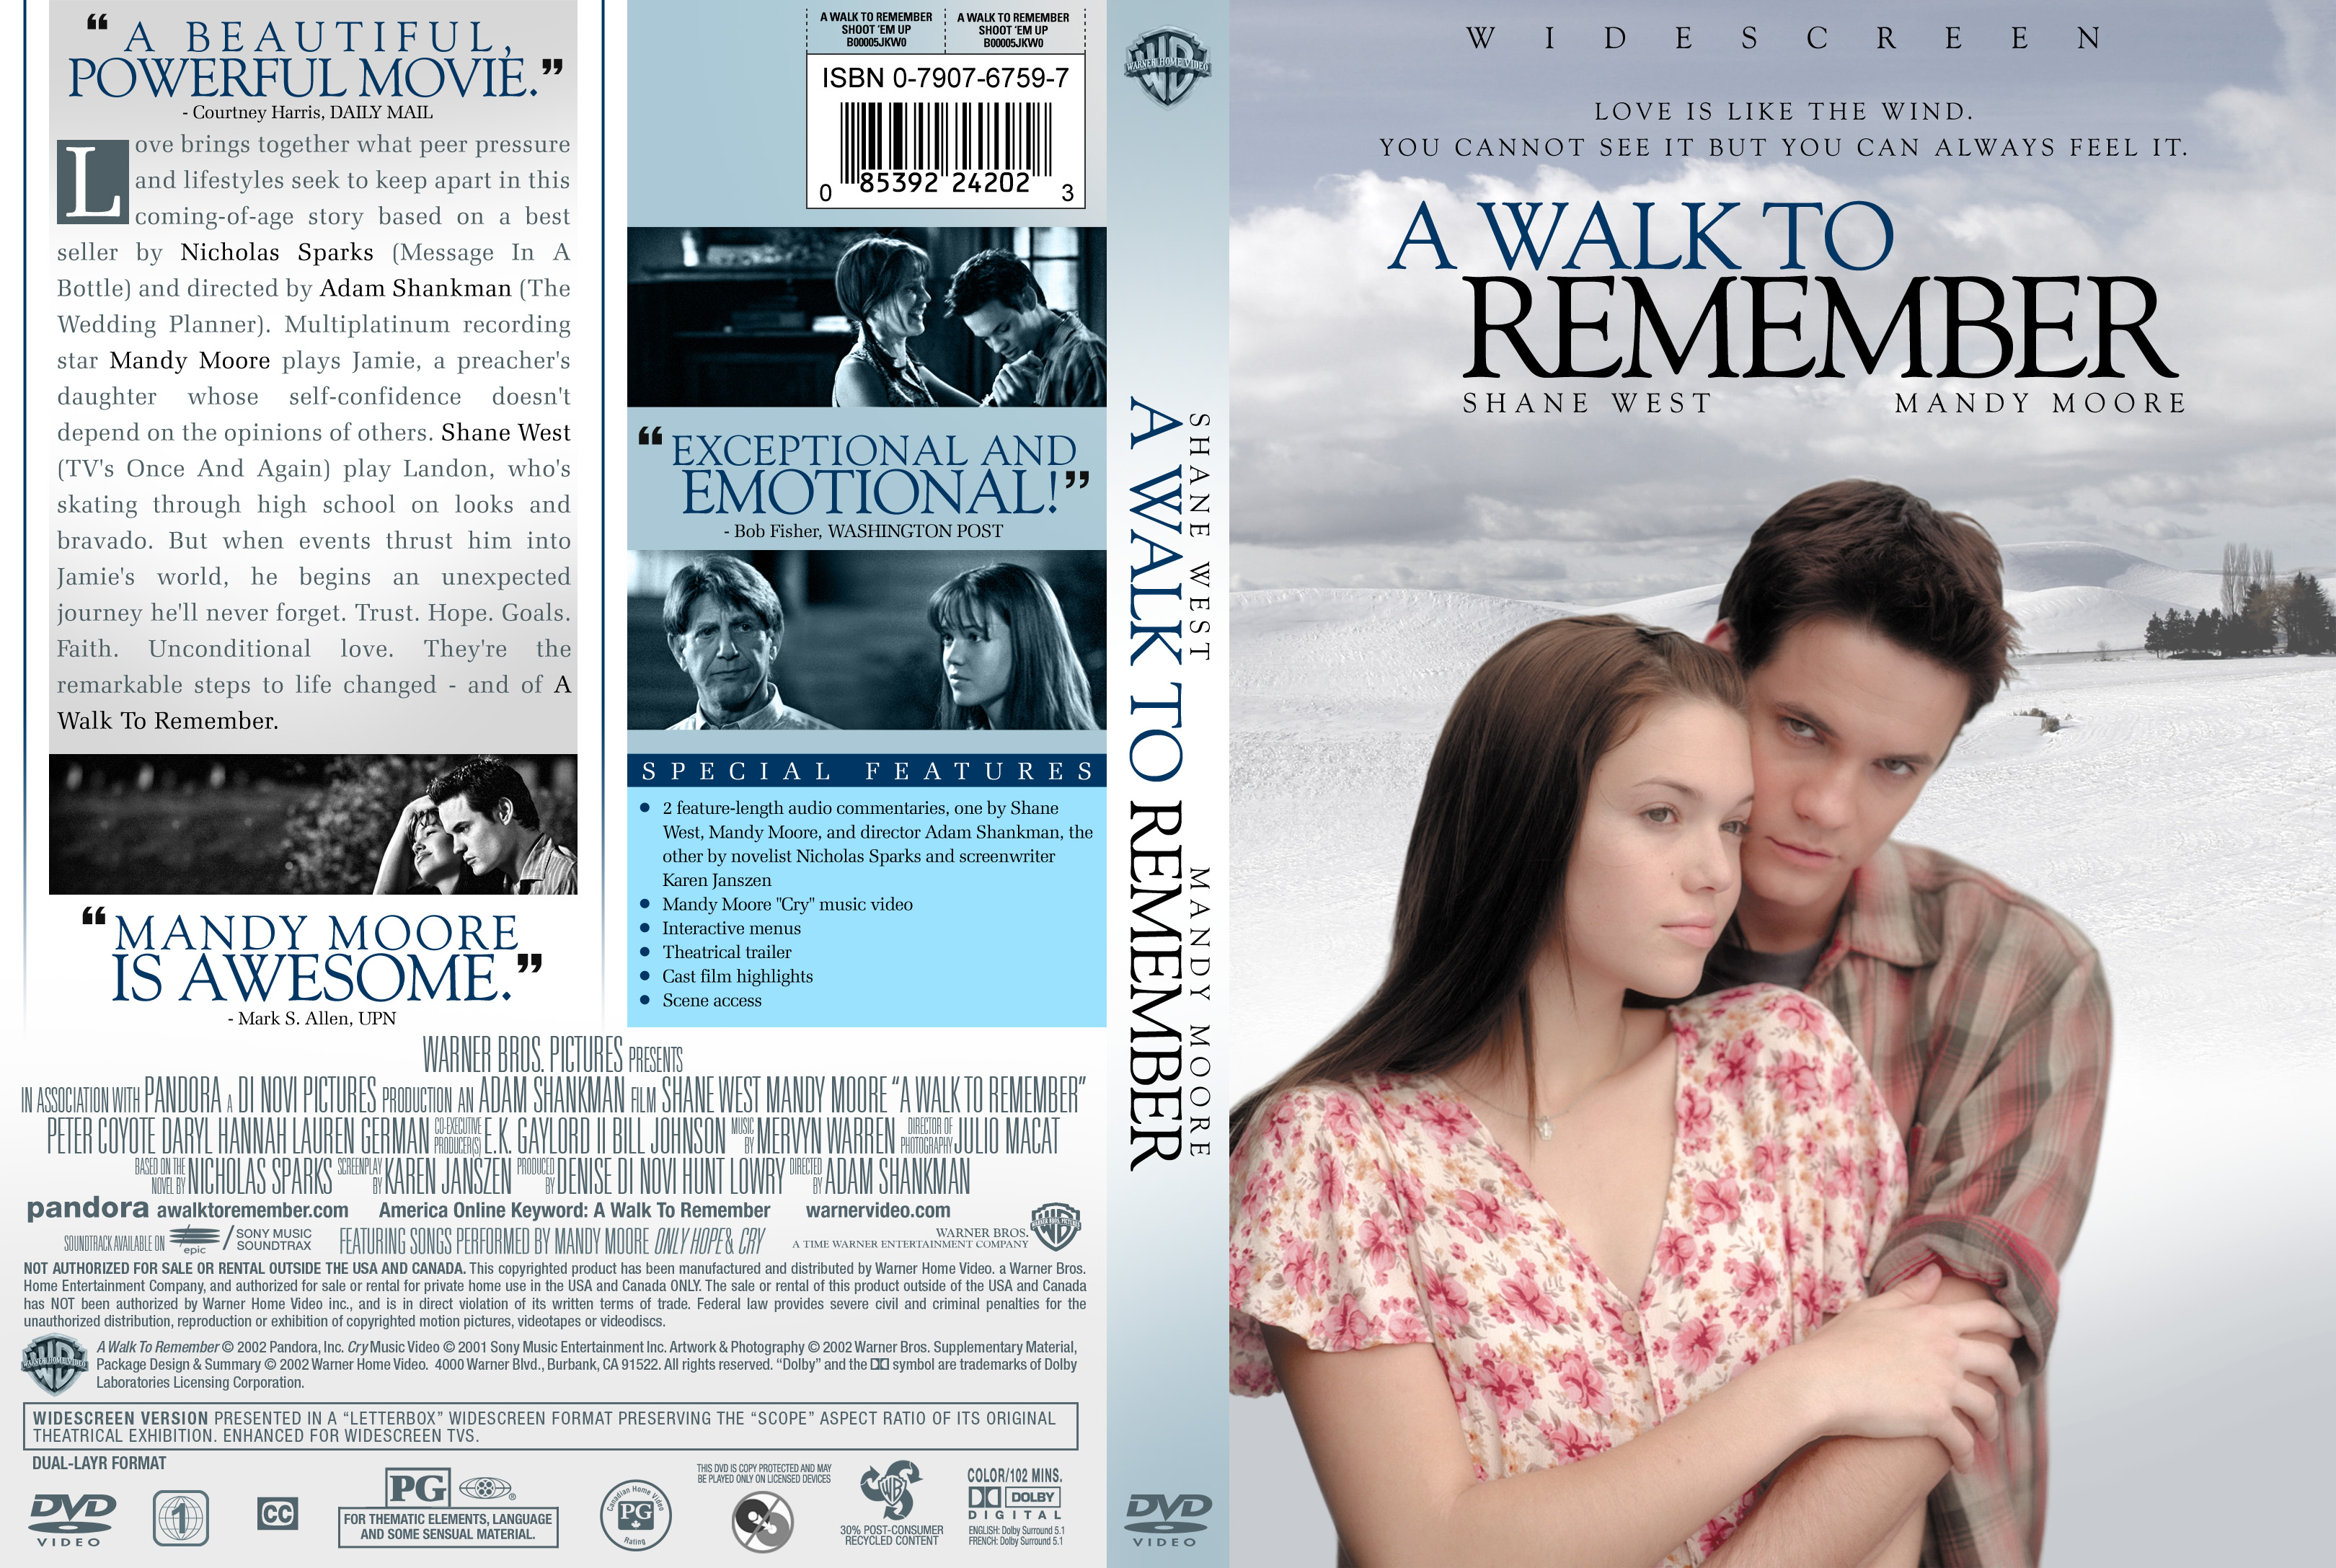 A walk to remembers cast: the ultimate eye candy